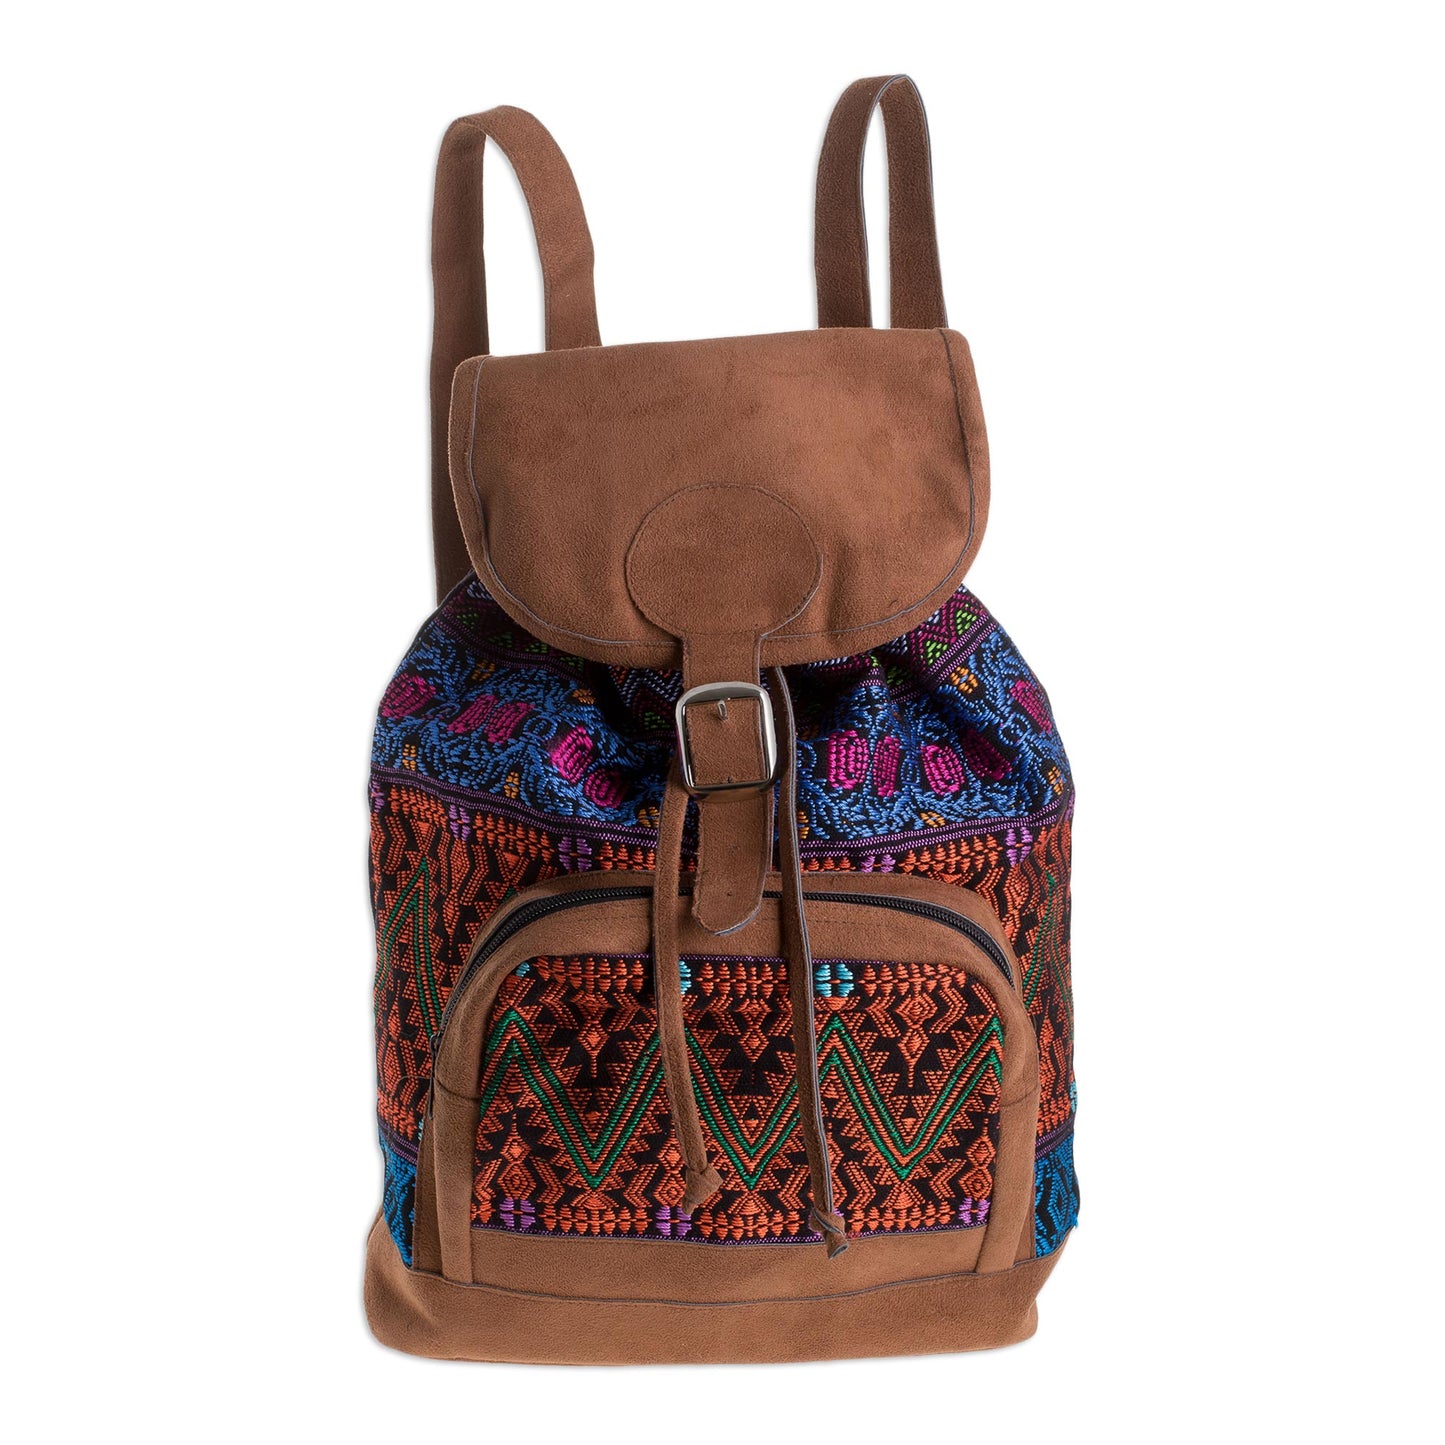 Multicolored Night Handwoven Multicolored Cotton Backpack from Guatemala